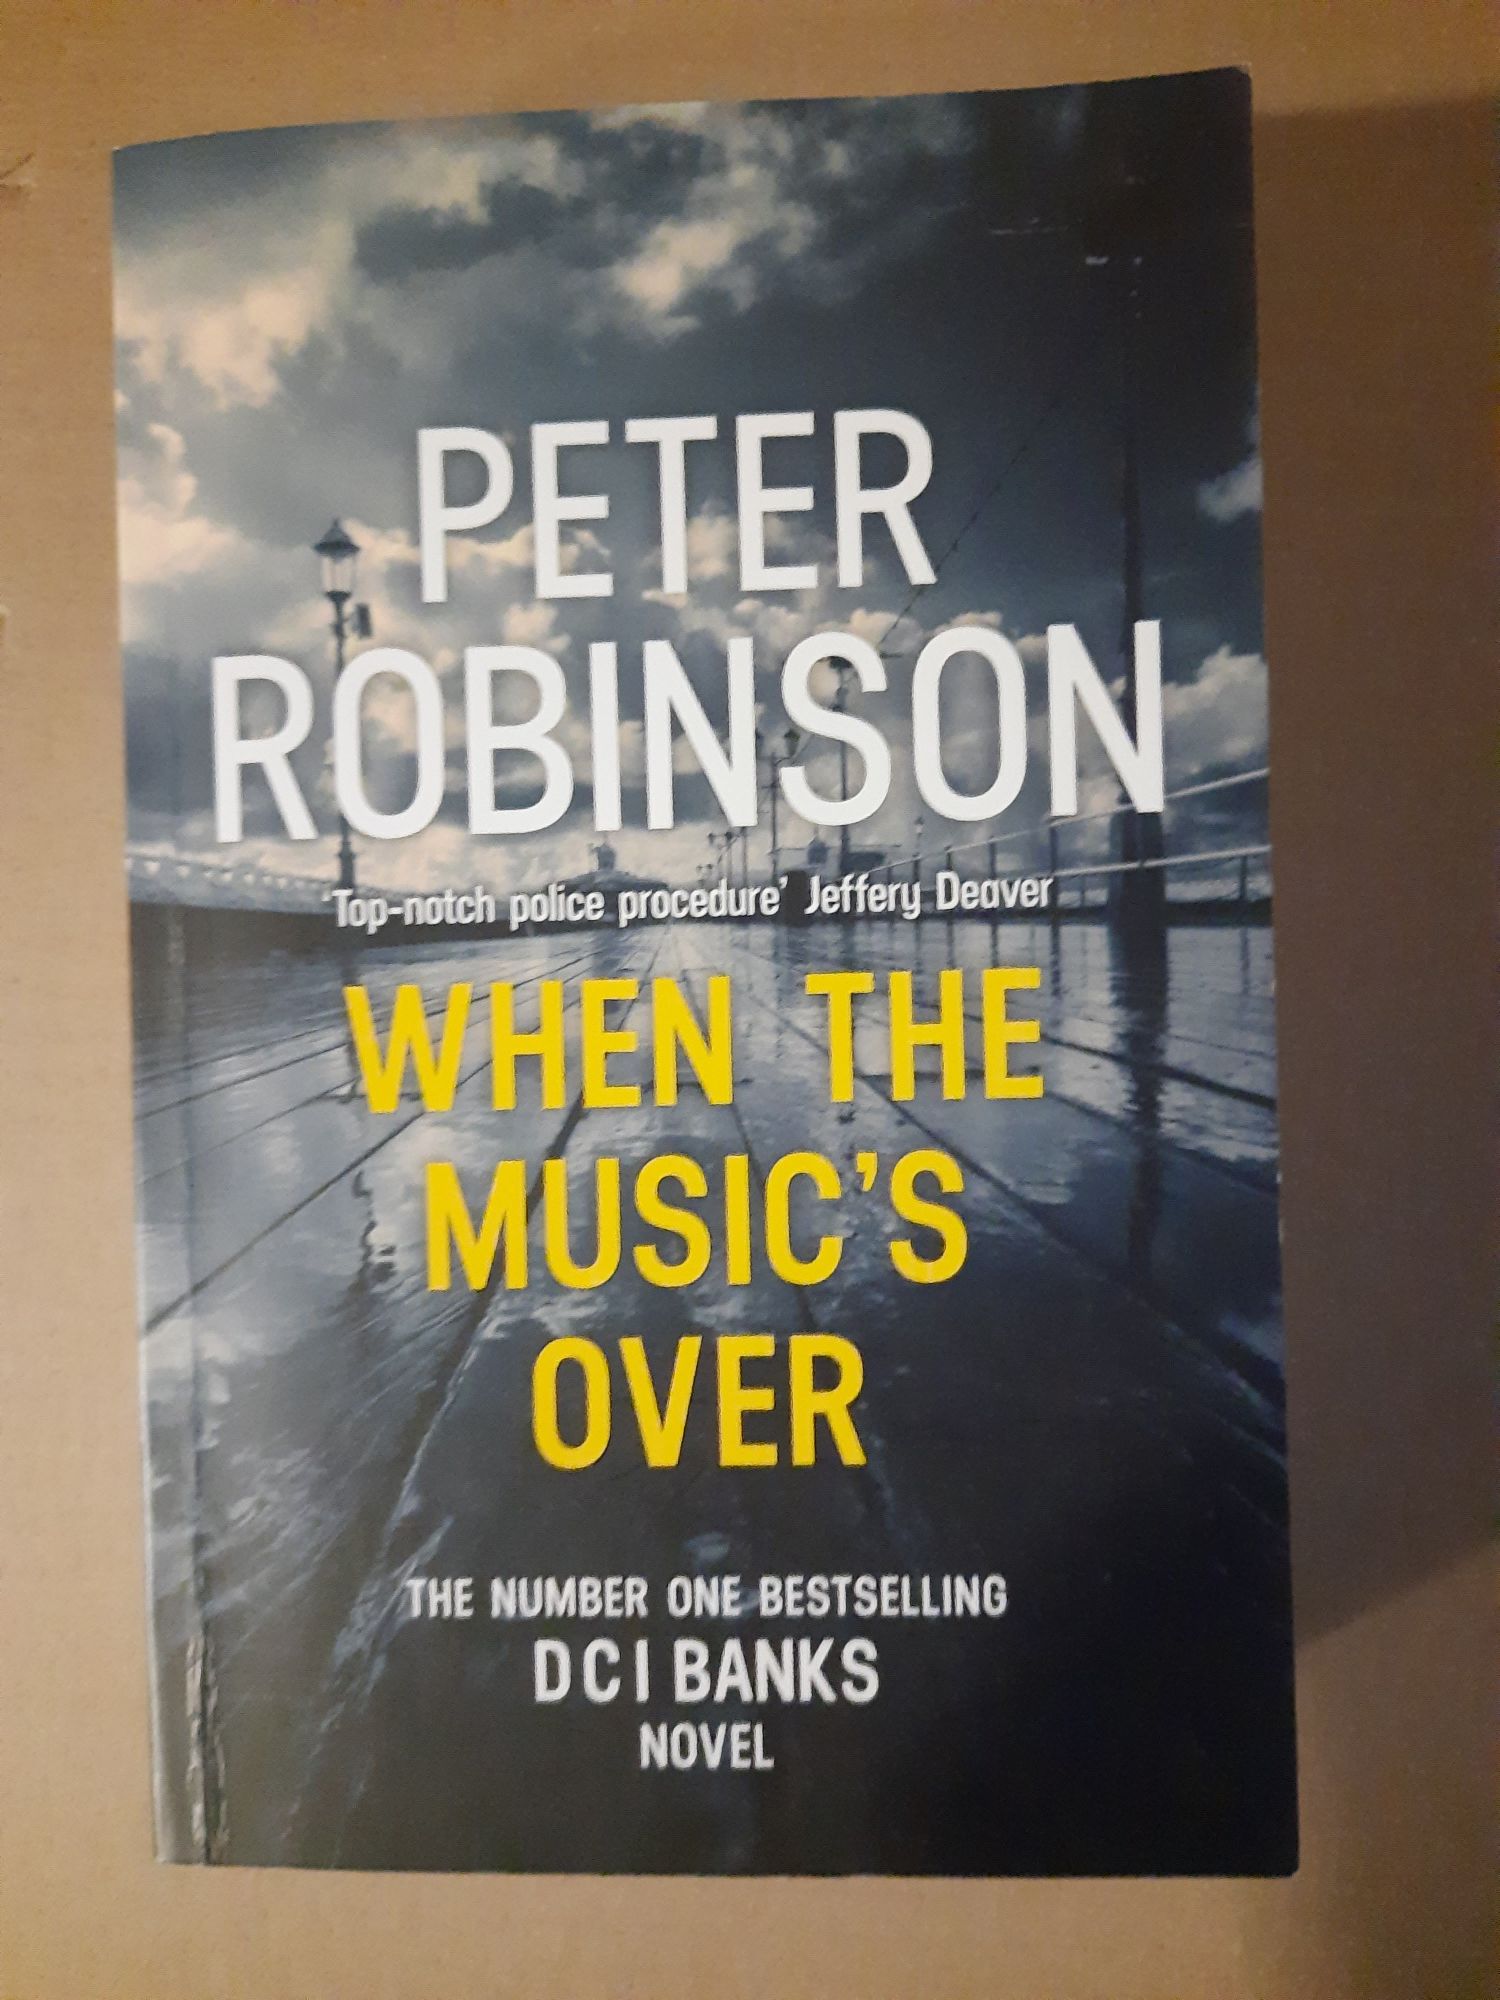 "When the music's over" - Peter Robinson.